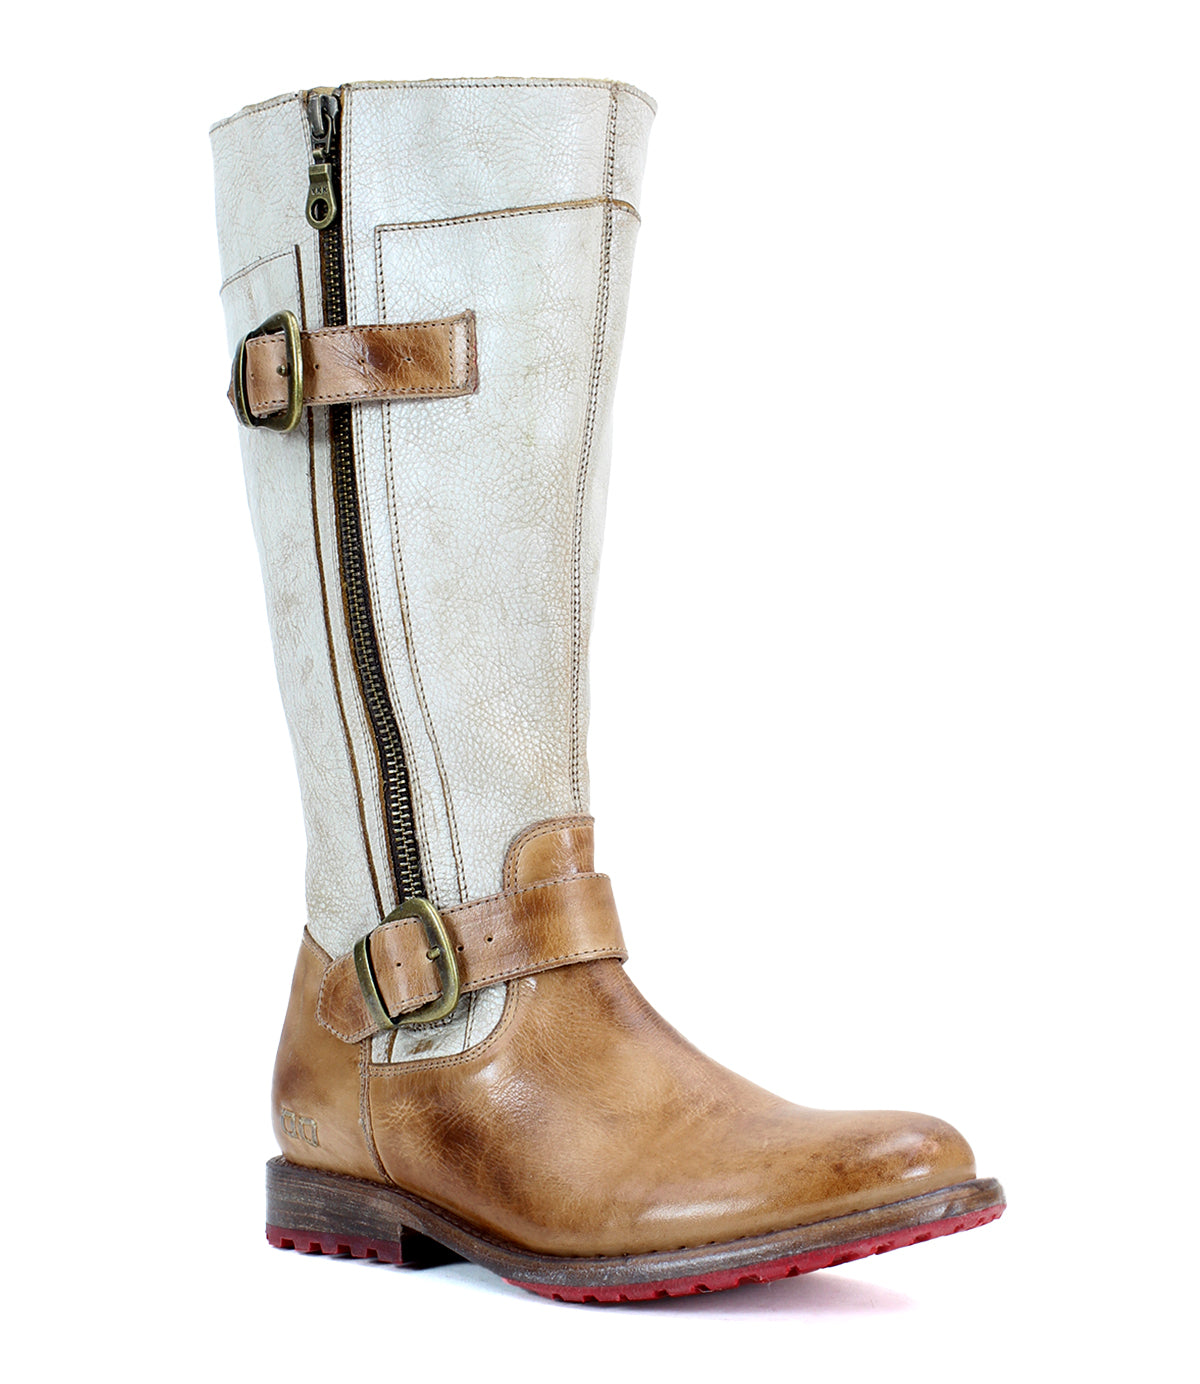 A brown and beige mid-calf leather boot featuring a side zipper, dual buckles, and a striking red sole. The durable lug outsole ensures long-lasting wear, effectively combining rugged and fashionable elements. The Gogo Lug from Bed Stu impresses with its unique design and functionality.